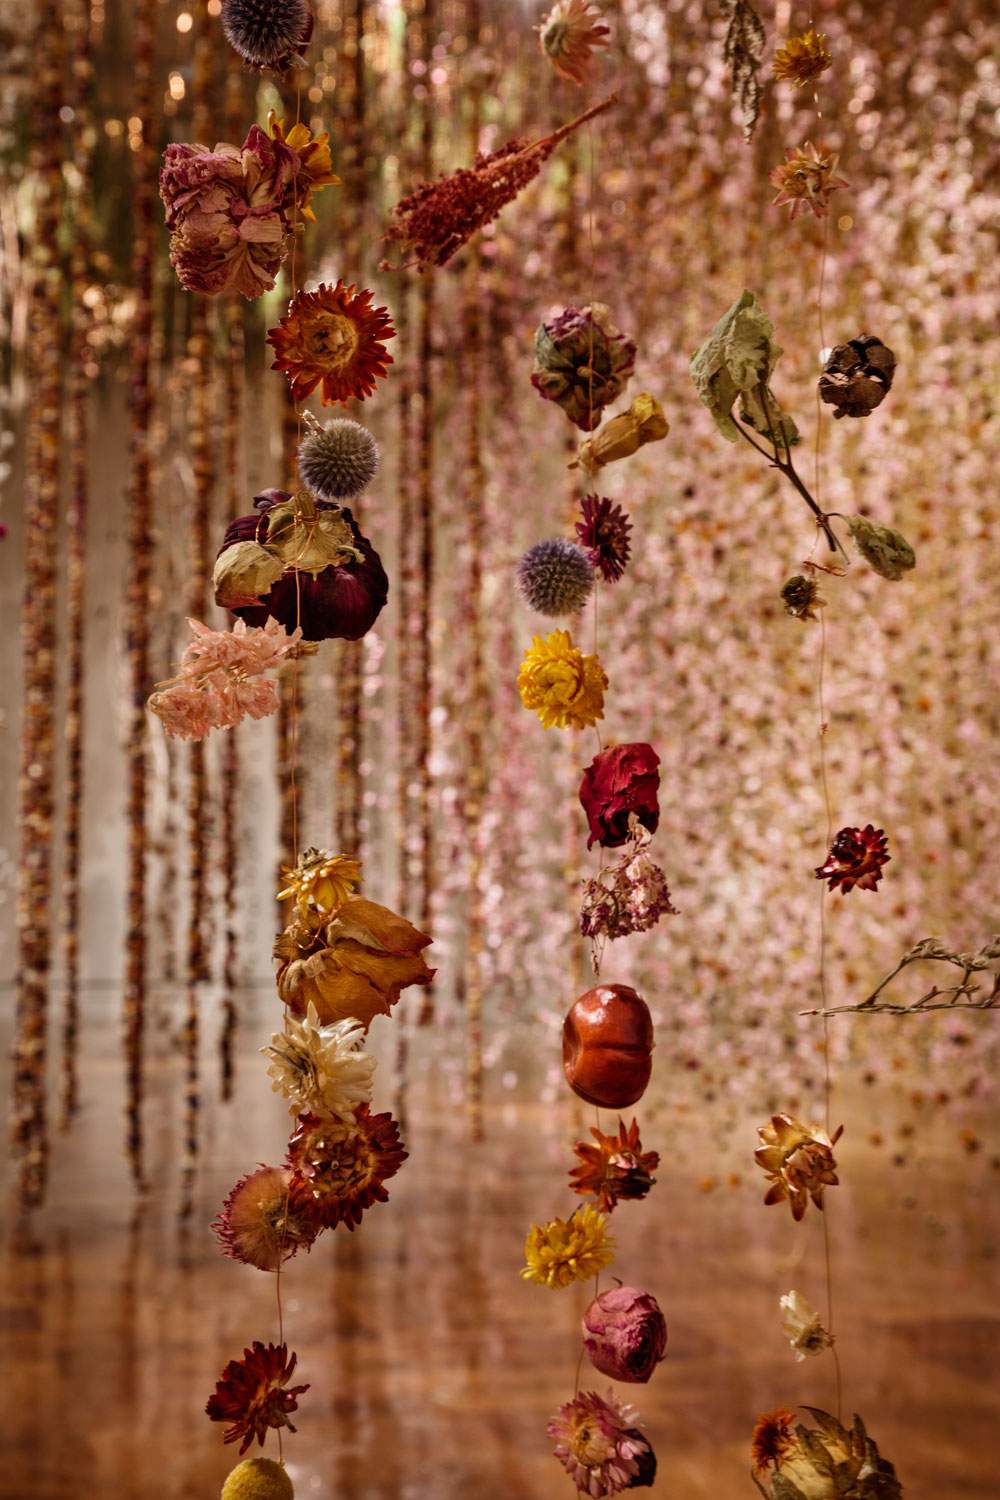 In Parma the first Italian solo exhibition of Rebecca Louise Law